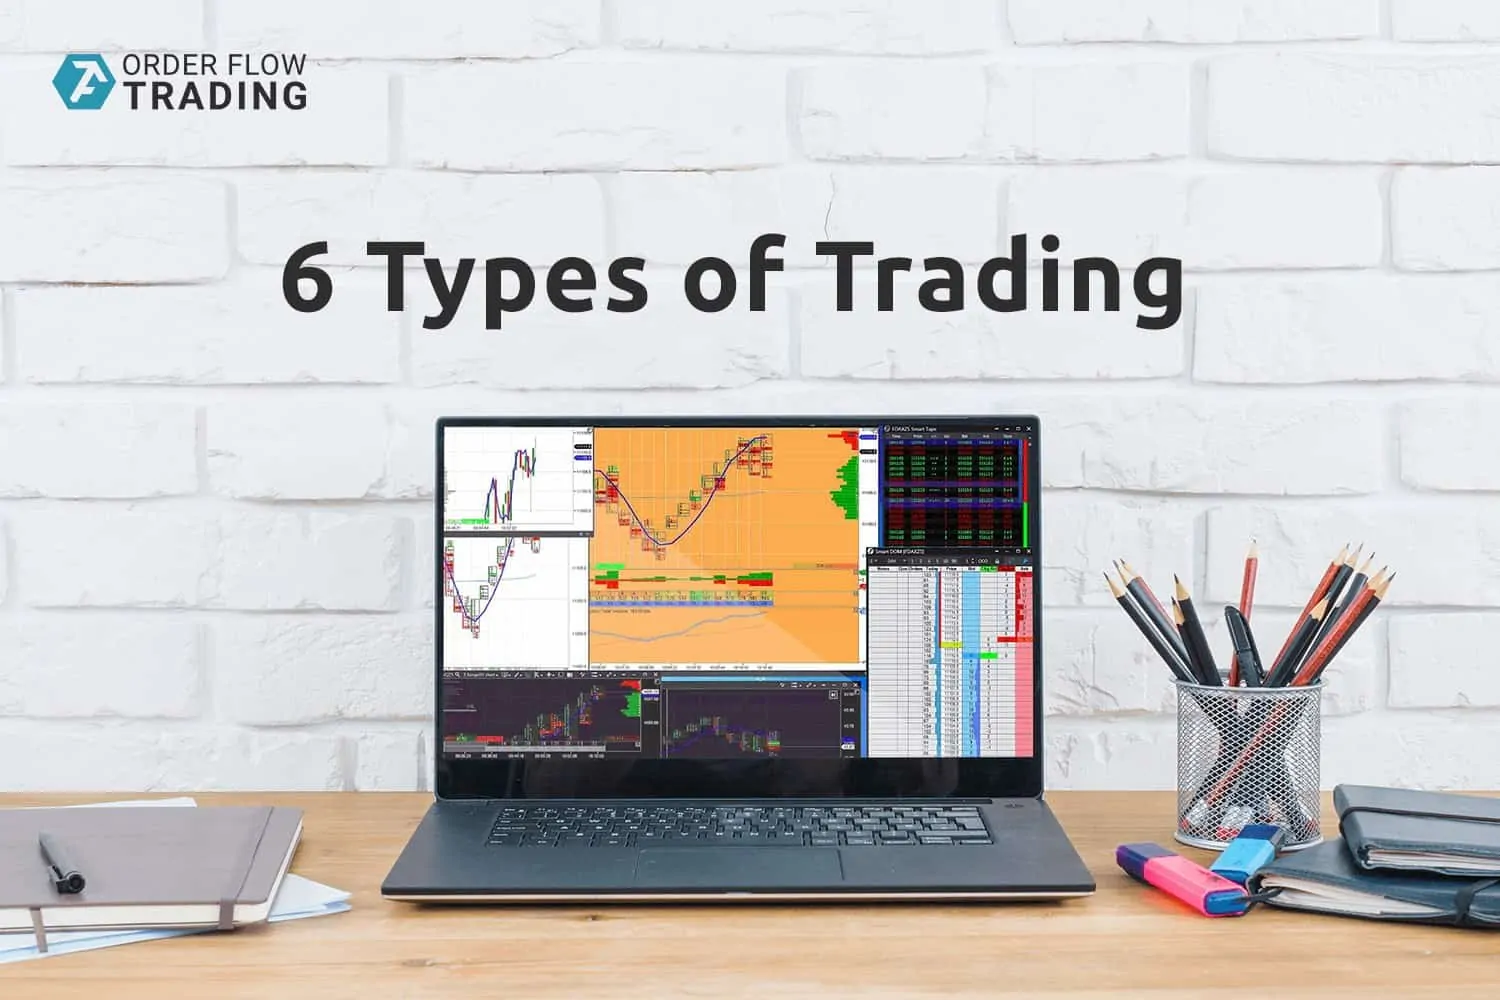 6 types of trading. Advantages and disadvantages.